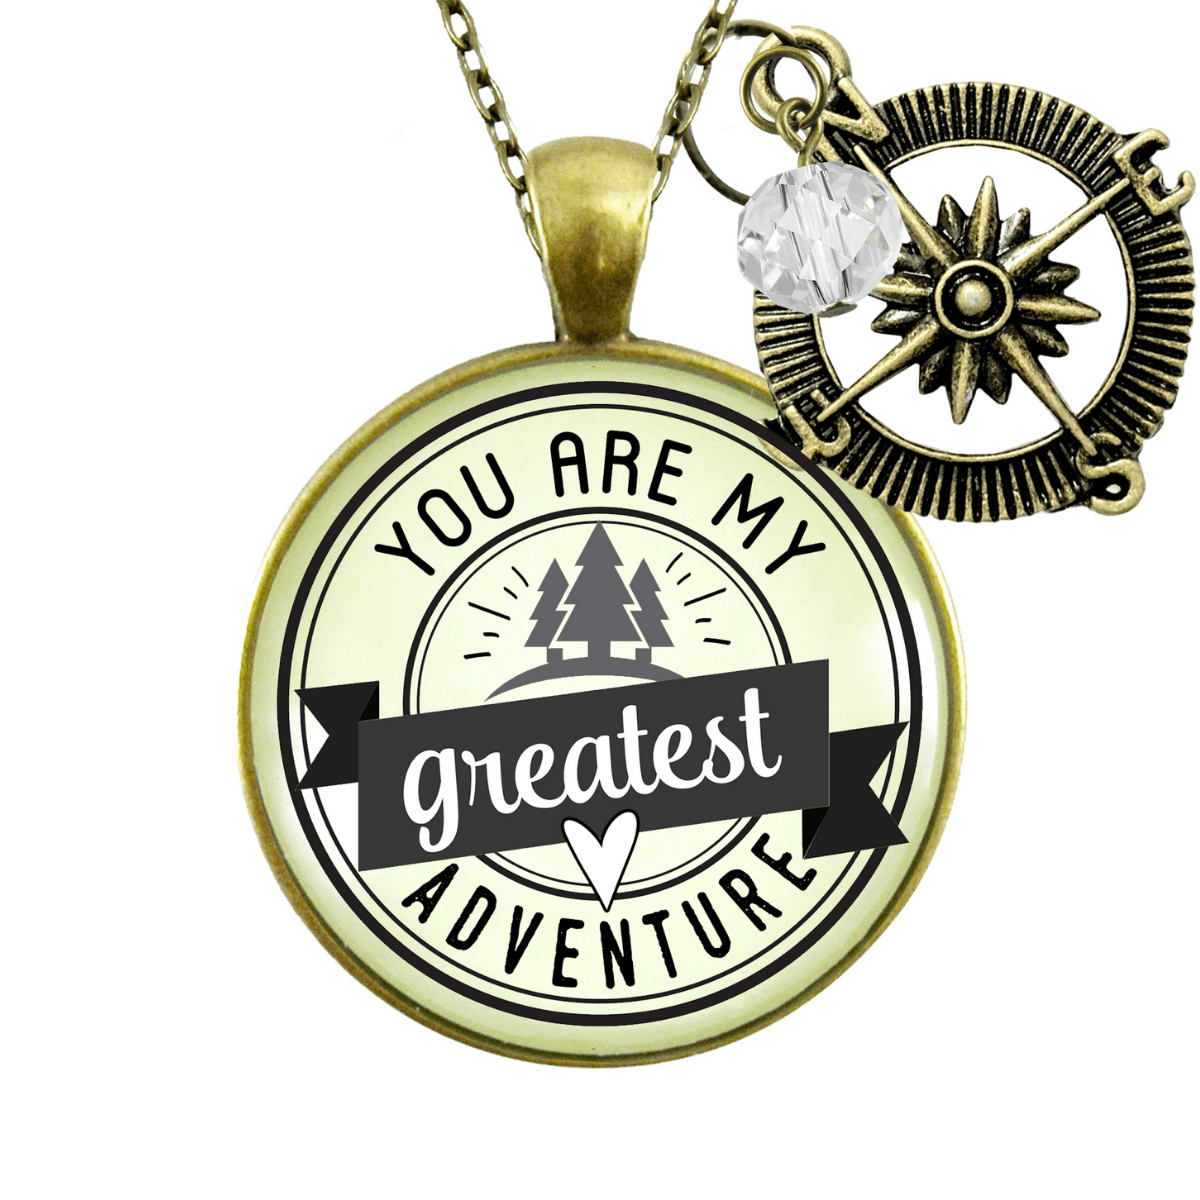 Gutsy Goodness You are My Greatest Adventure Compass Necklace Romantic Couple Gift - Gutsy Goodness;You Are My Greatest Adventure Compass Necklace Romantic Couple Gift - Gutsy Goodness Handmade Jewelry Gifts